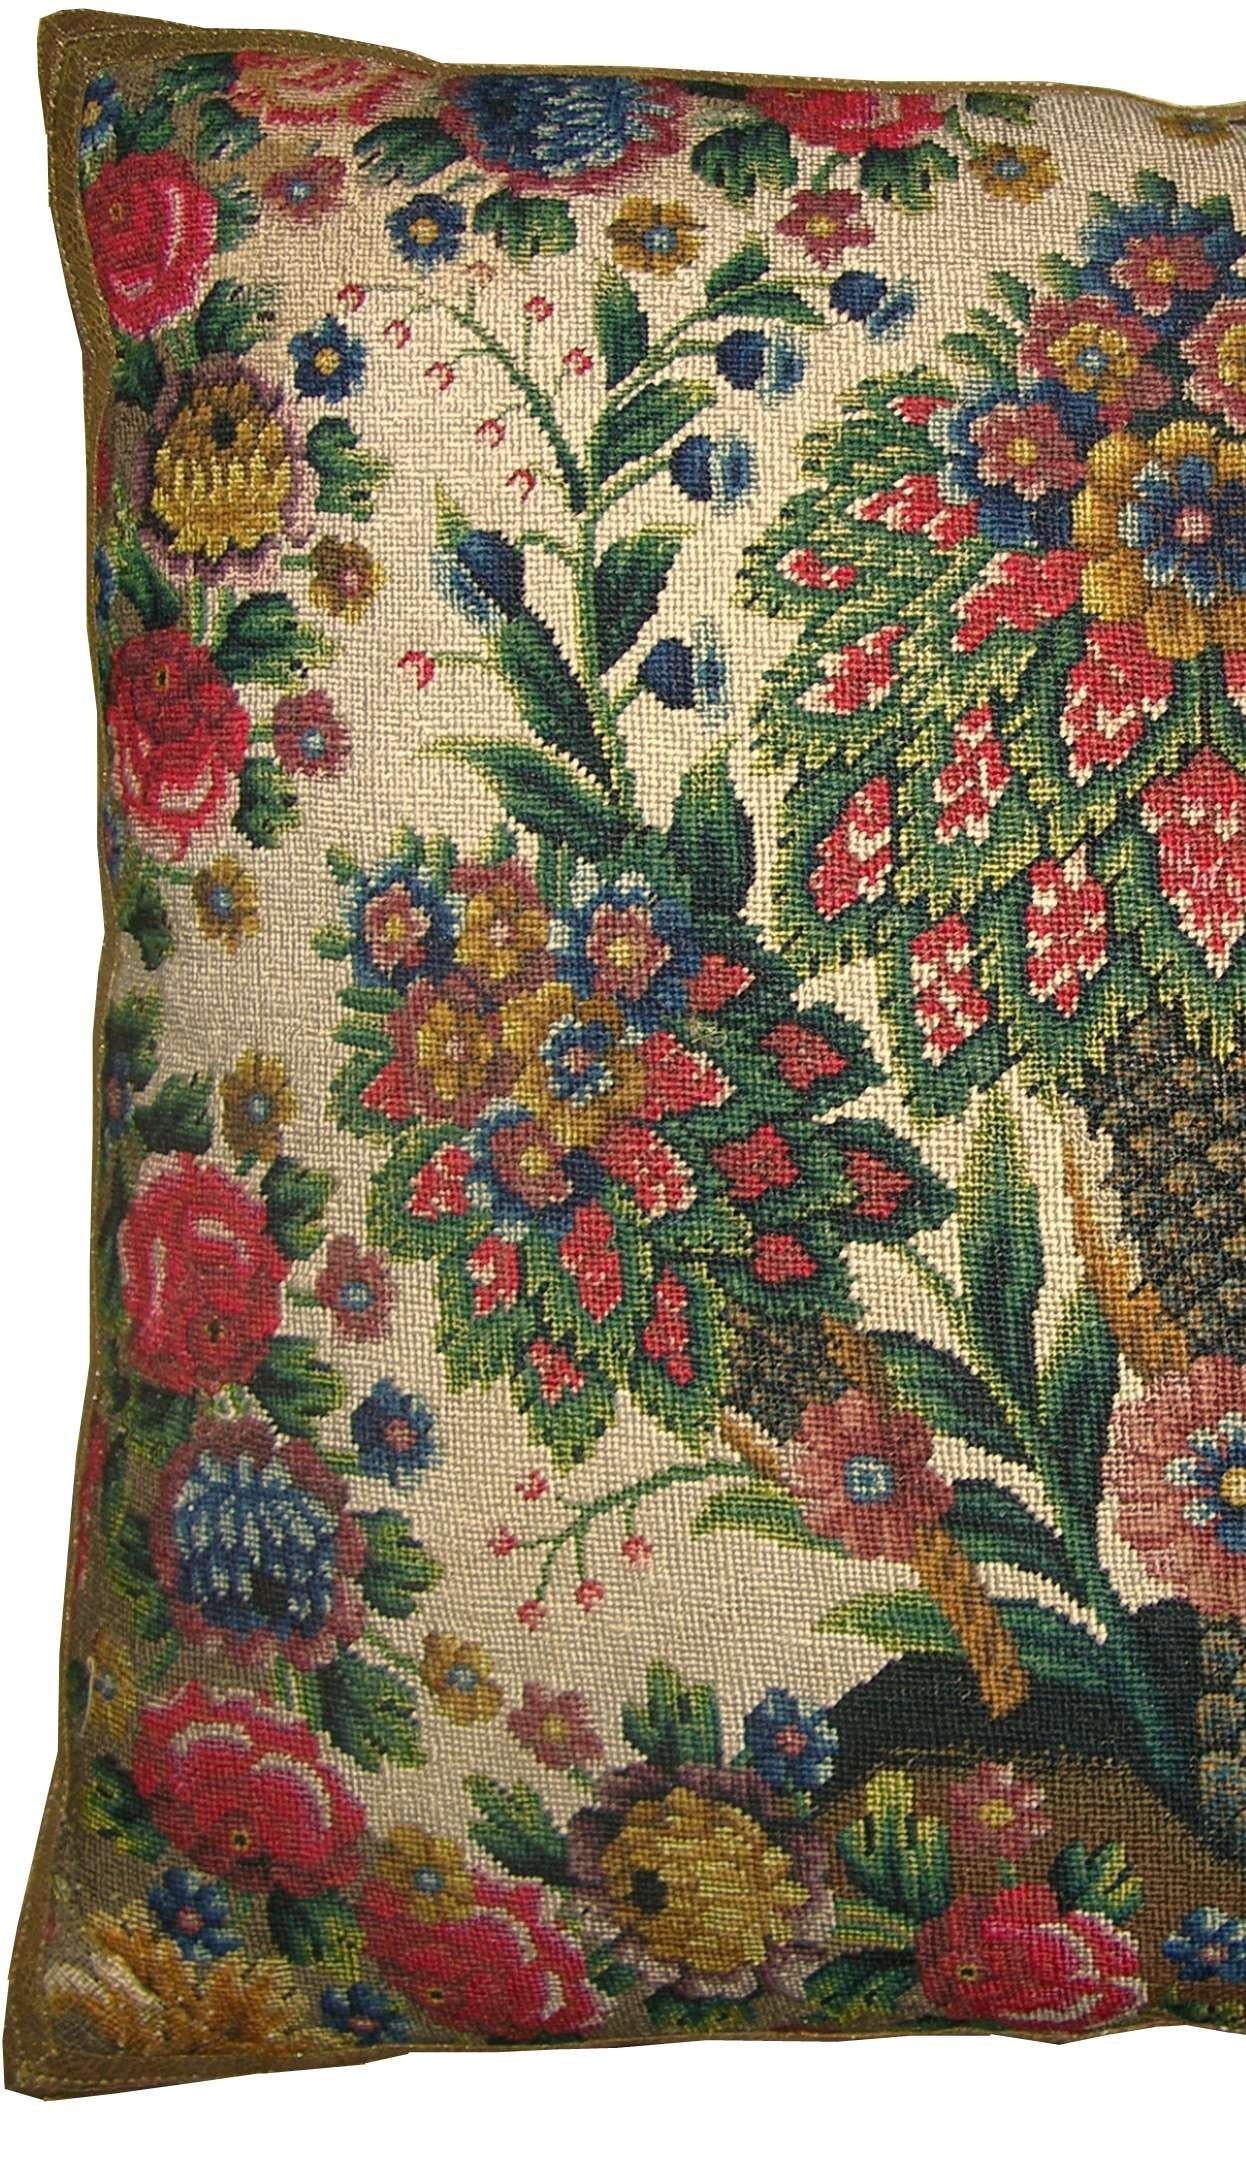 Ca. 1850 Antique Needlepoint Tapestry Pillow
